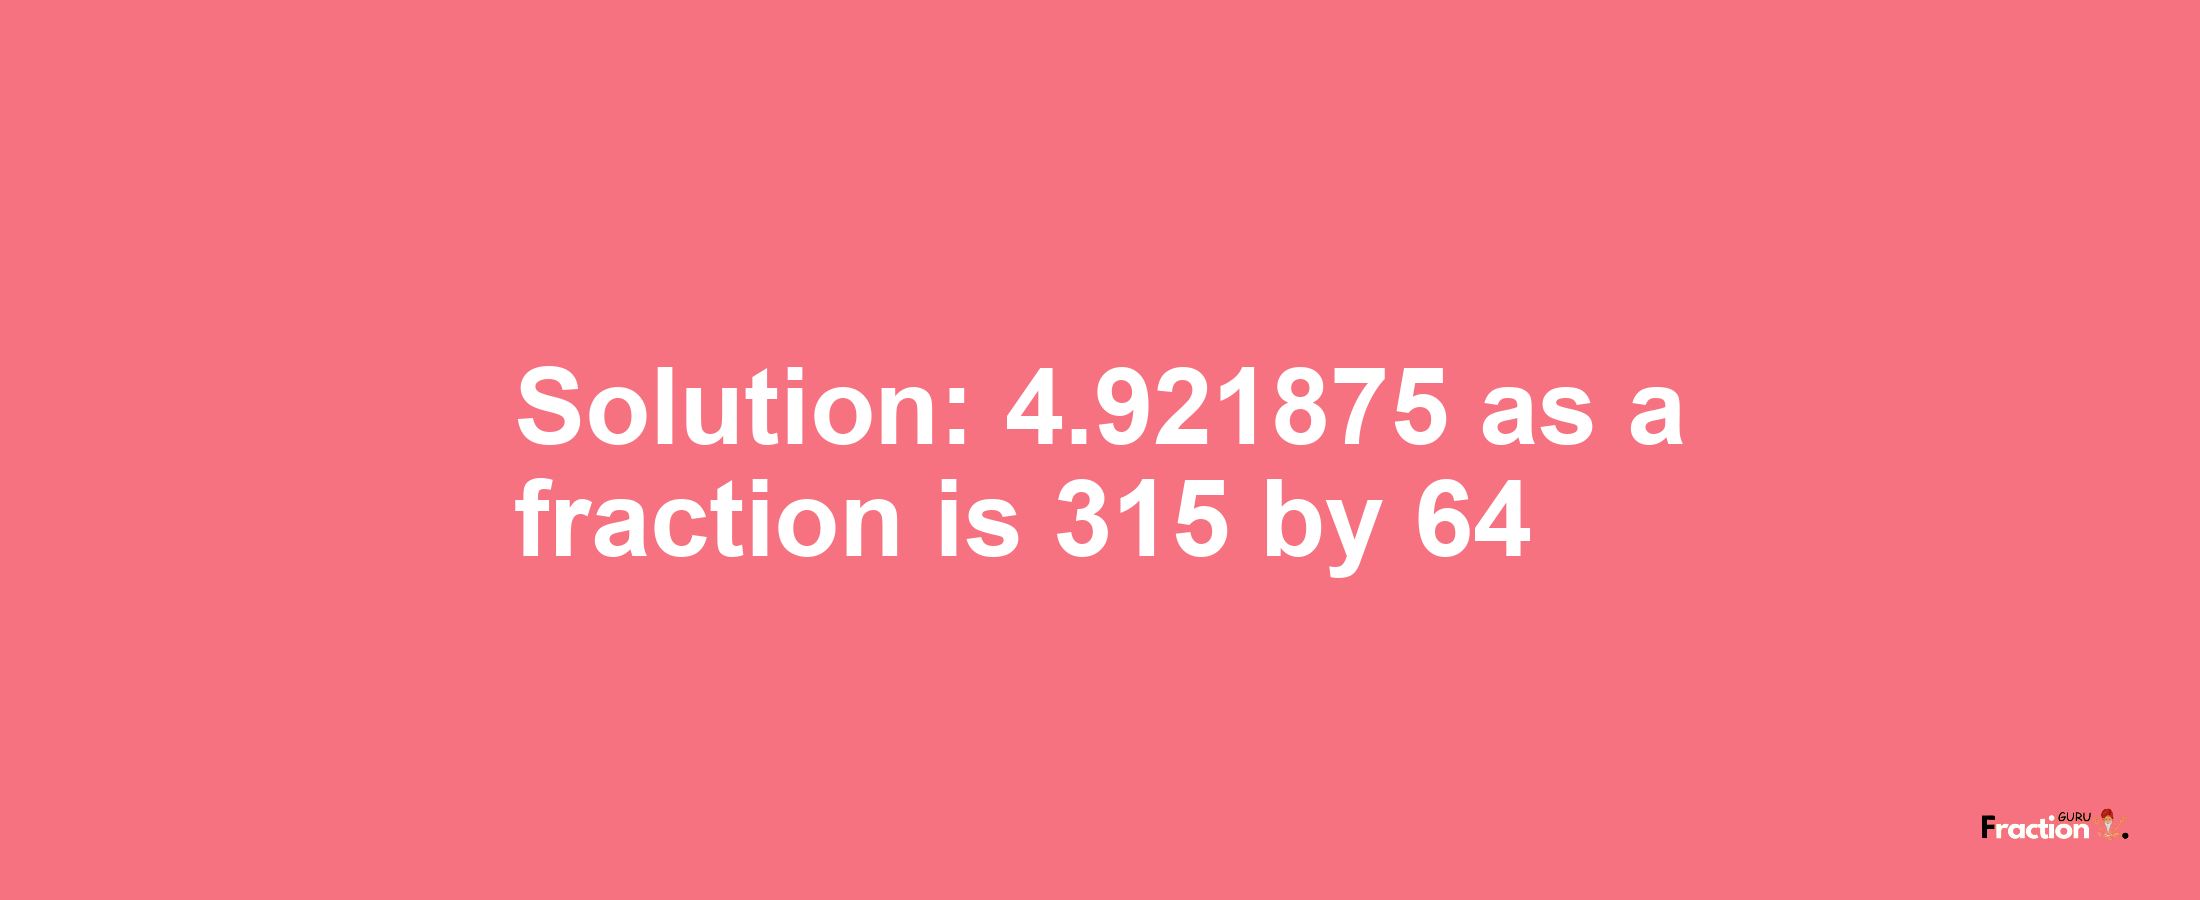 Solution:4.921875 as a fraction is 315/64